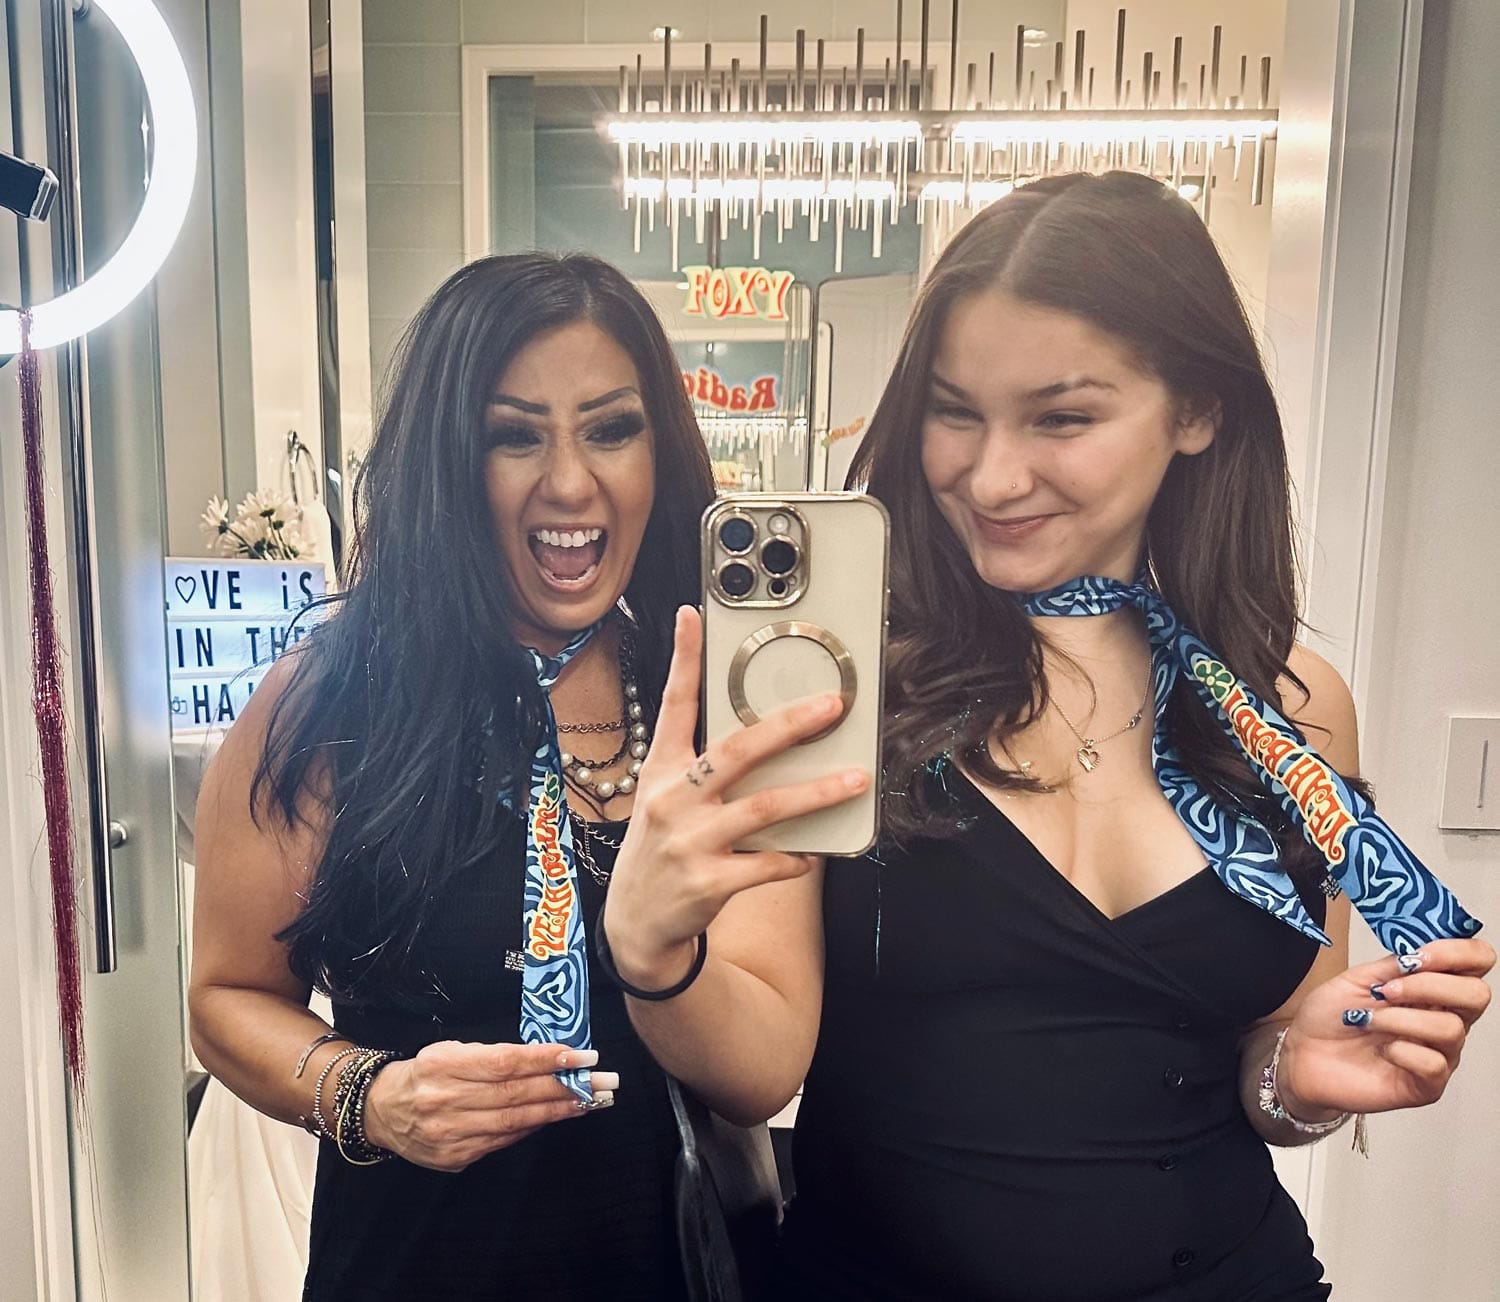 Two women posing for a selfie in a mirror, one making a surprised expression and the other smiling, both wearing decorative scarves.